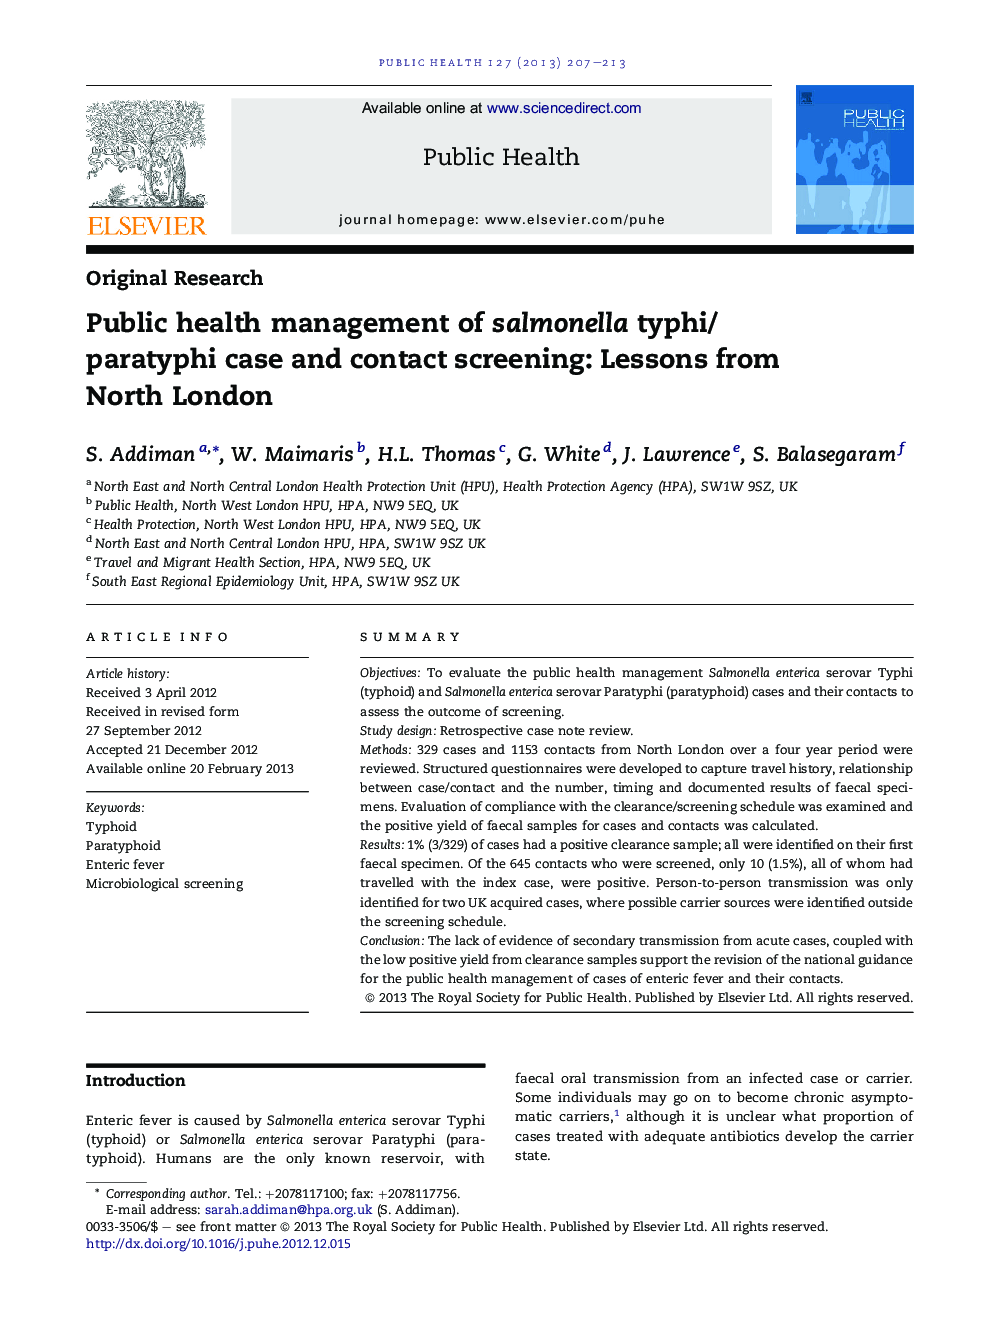 Public health management of salmonella typhi/paratyphi case and contact screening: Lessons from North London